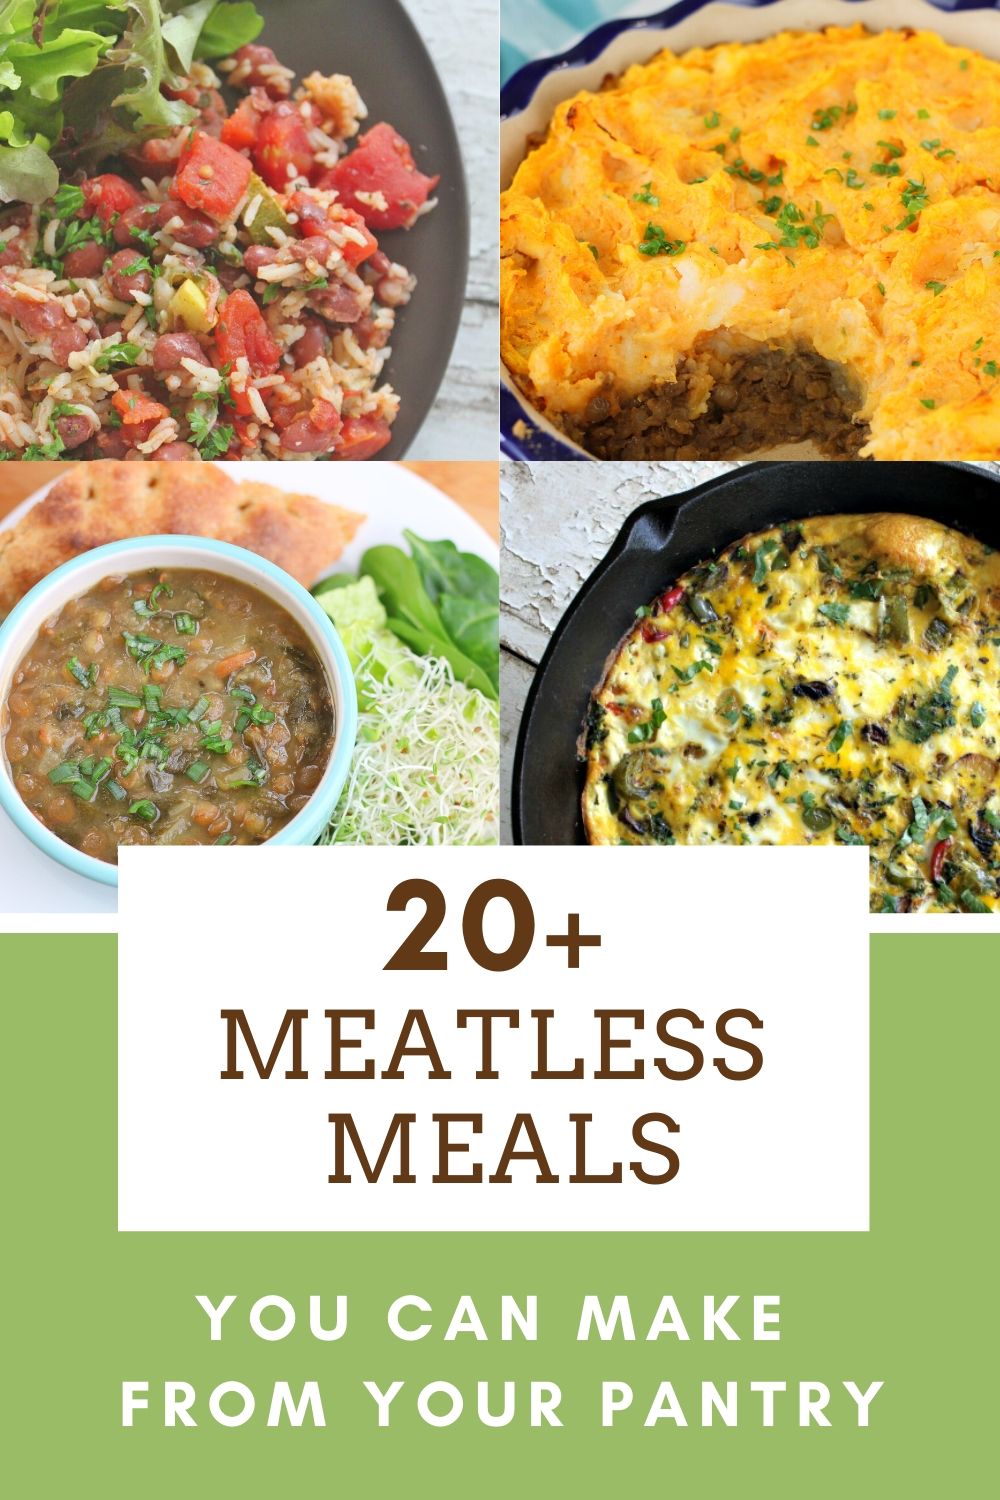 20+ Meatless Meals You Can Make from Your Pantry • Cheapskate Cook